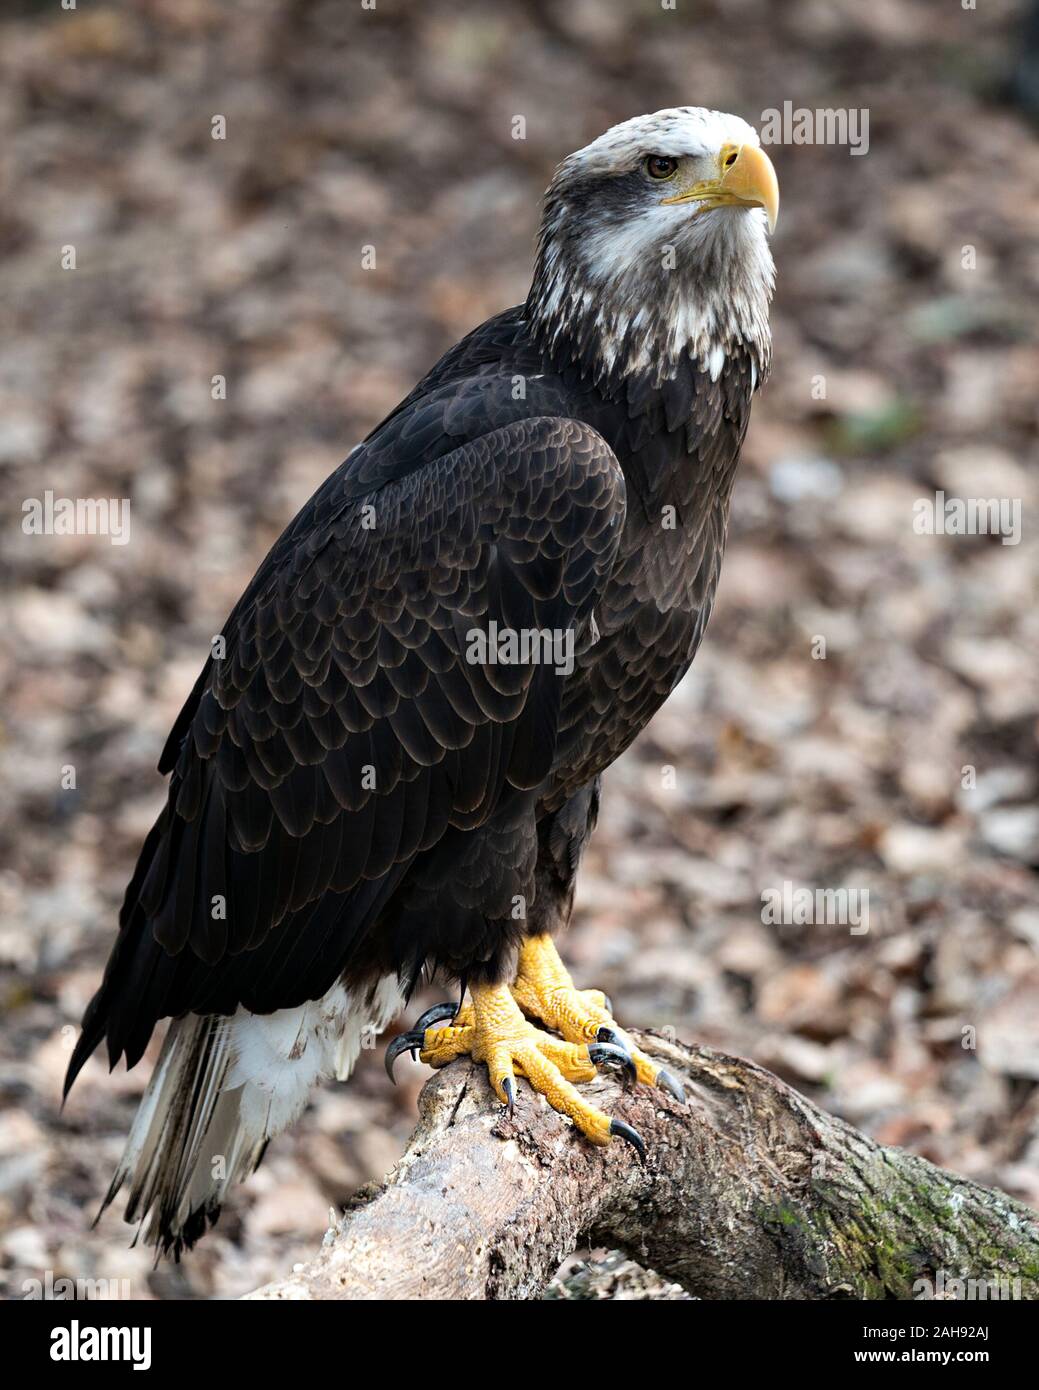 Bald Eagle Juvenile bird close-up profile view perched on a log displaying brown feathers plumage, white head, eye, beak, talons, in its surrounding a Stock Photo